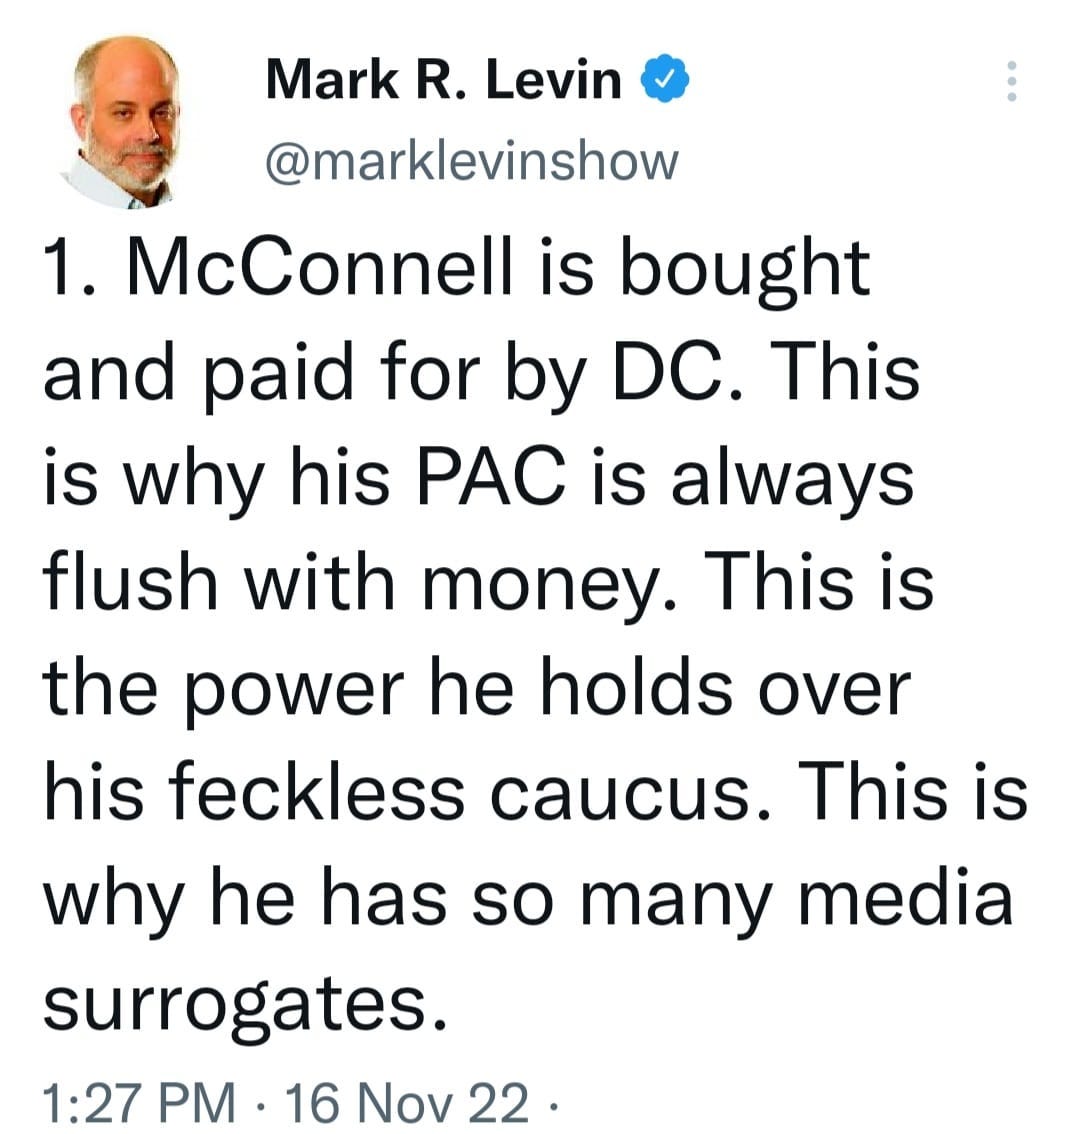 May be a Twitter screenshot of 1 person and text that says 'Mark R. Levin @marklevinshow 1. McConnell is bought and paid for by DC. This is why his PAC is always flush with money. This is the power he holds over his feckless caucus. This is why he has so many media surrogates. 1:27 PM 16 Nov 22.'